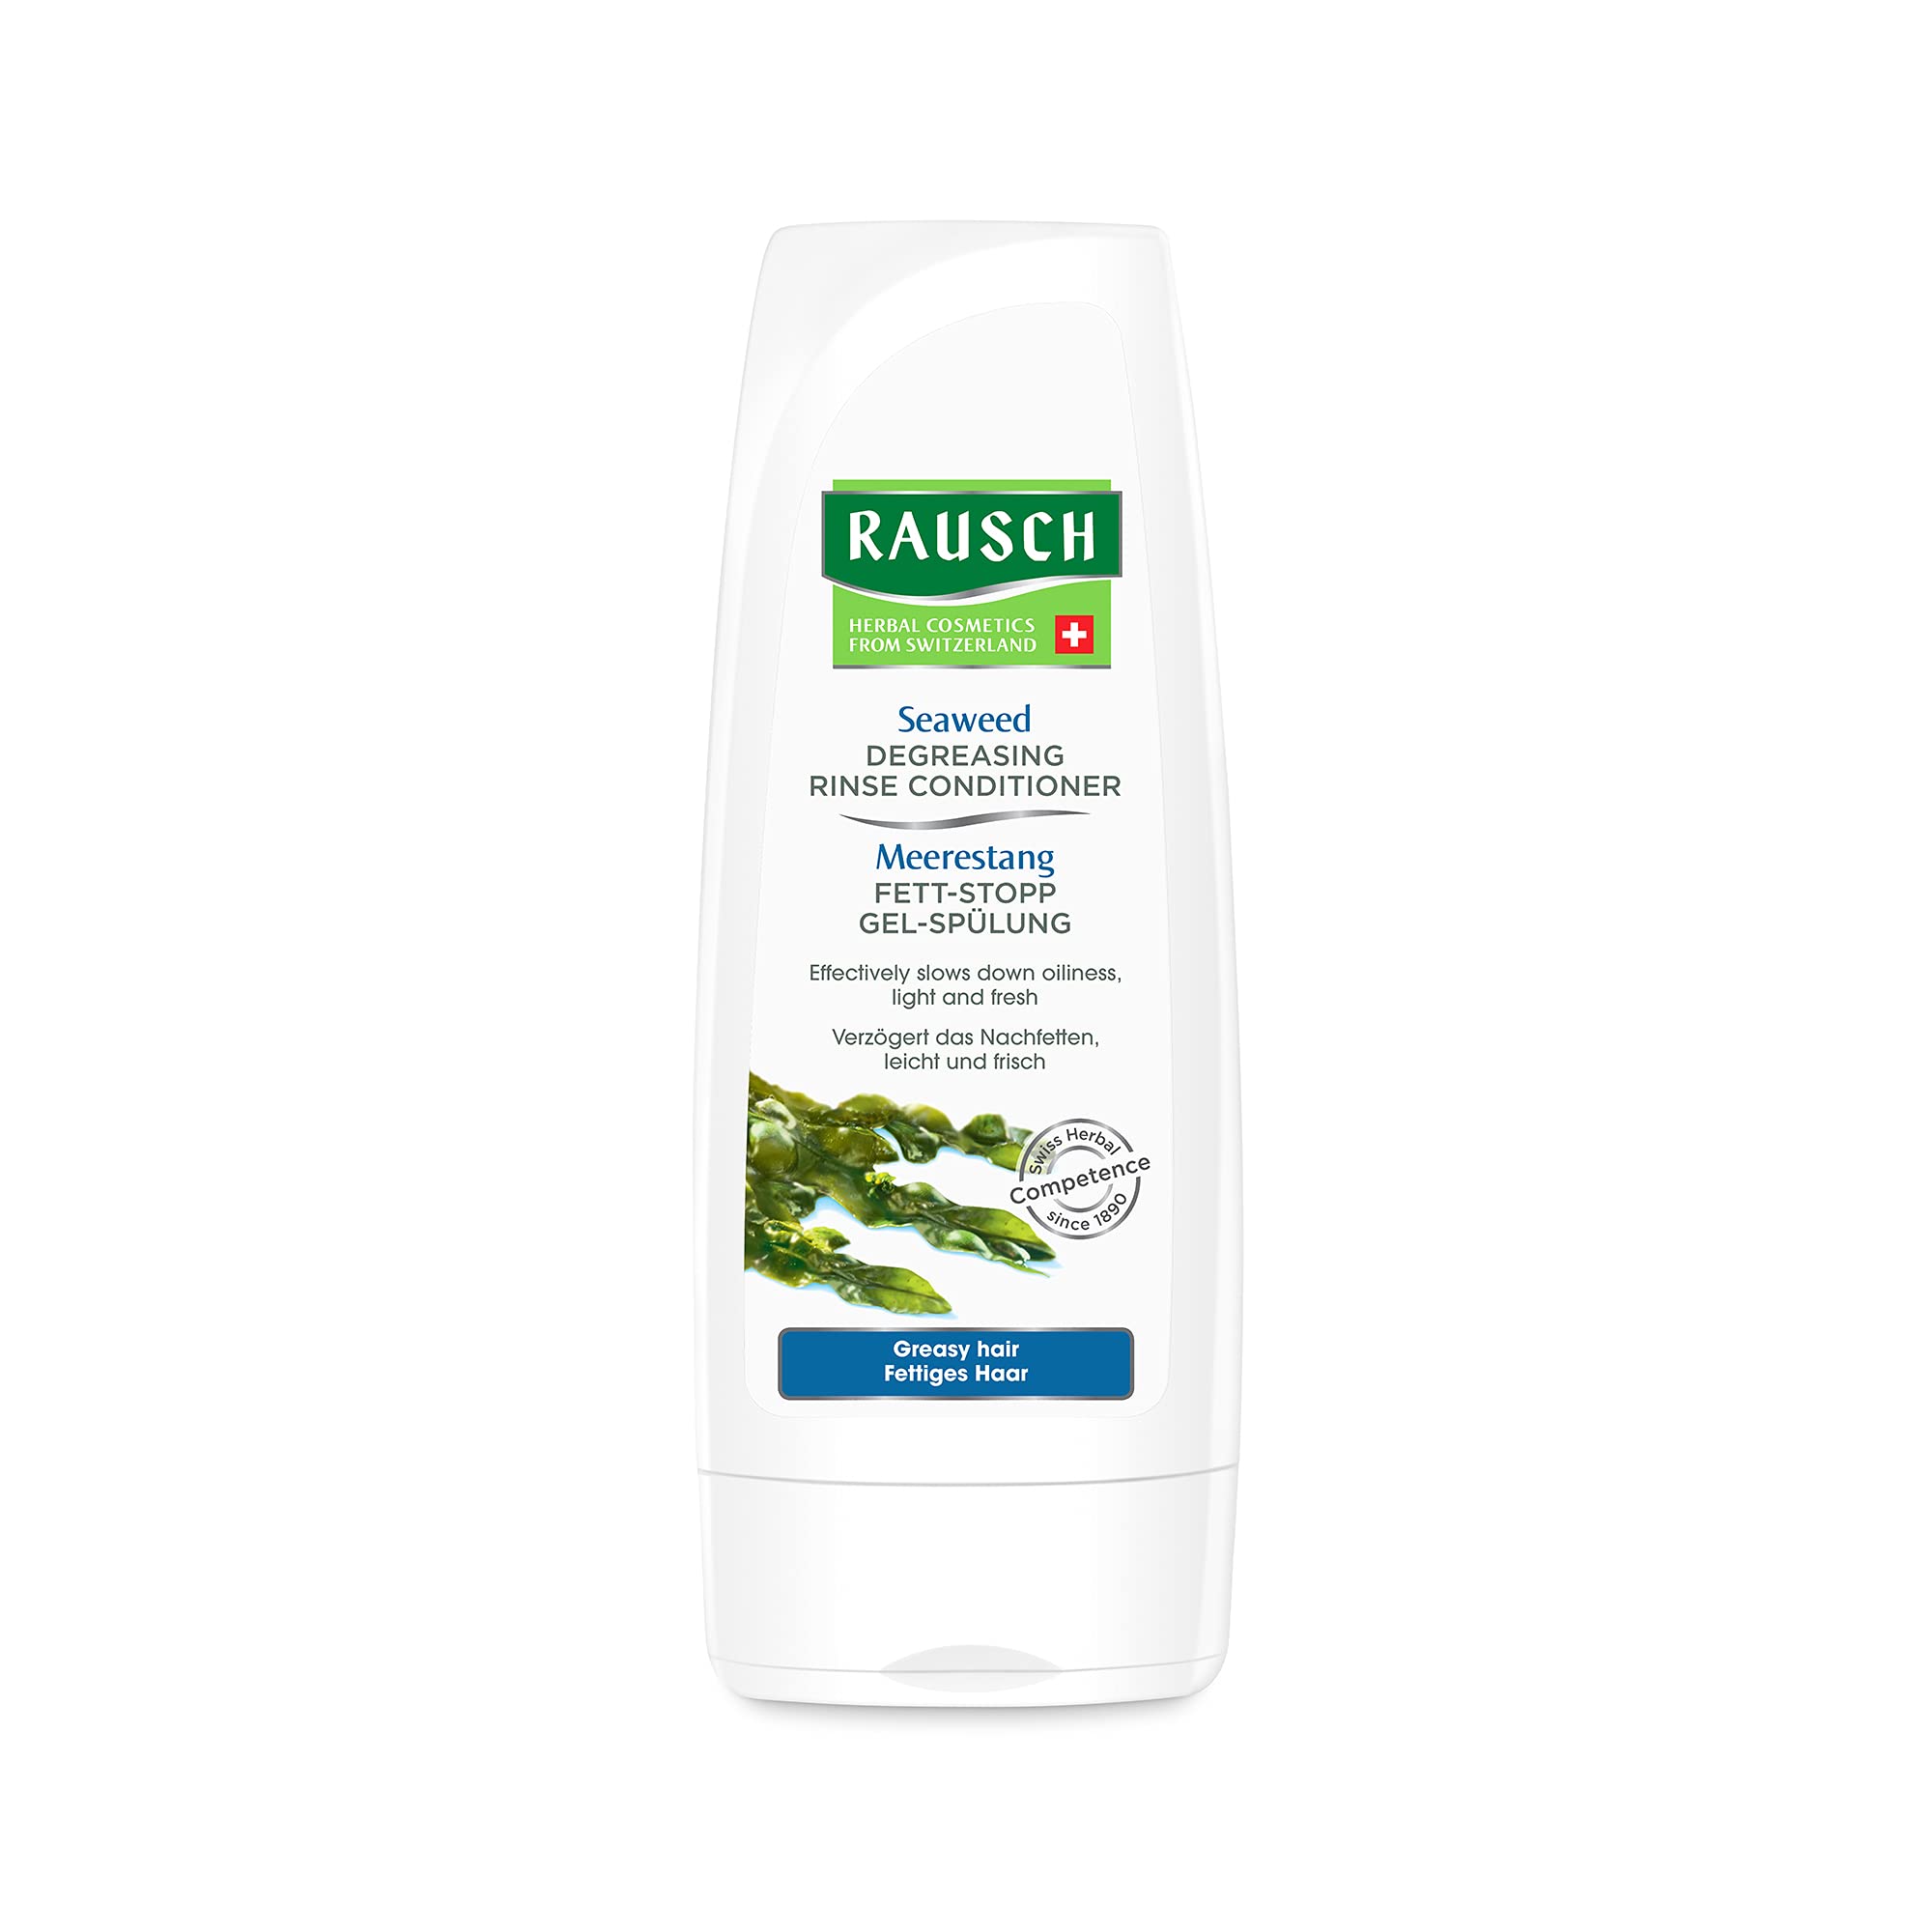 RAUSCH Seaweed Degreasing Rinse Conditioner 200 ml